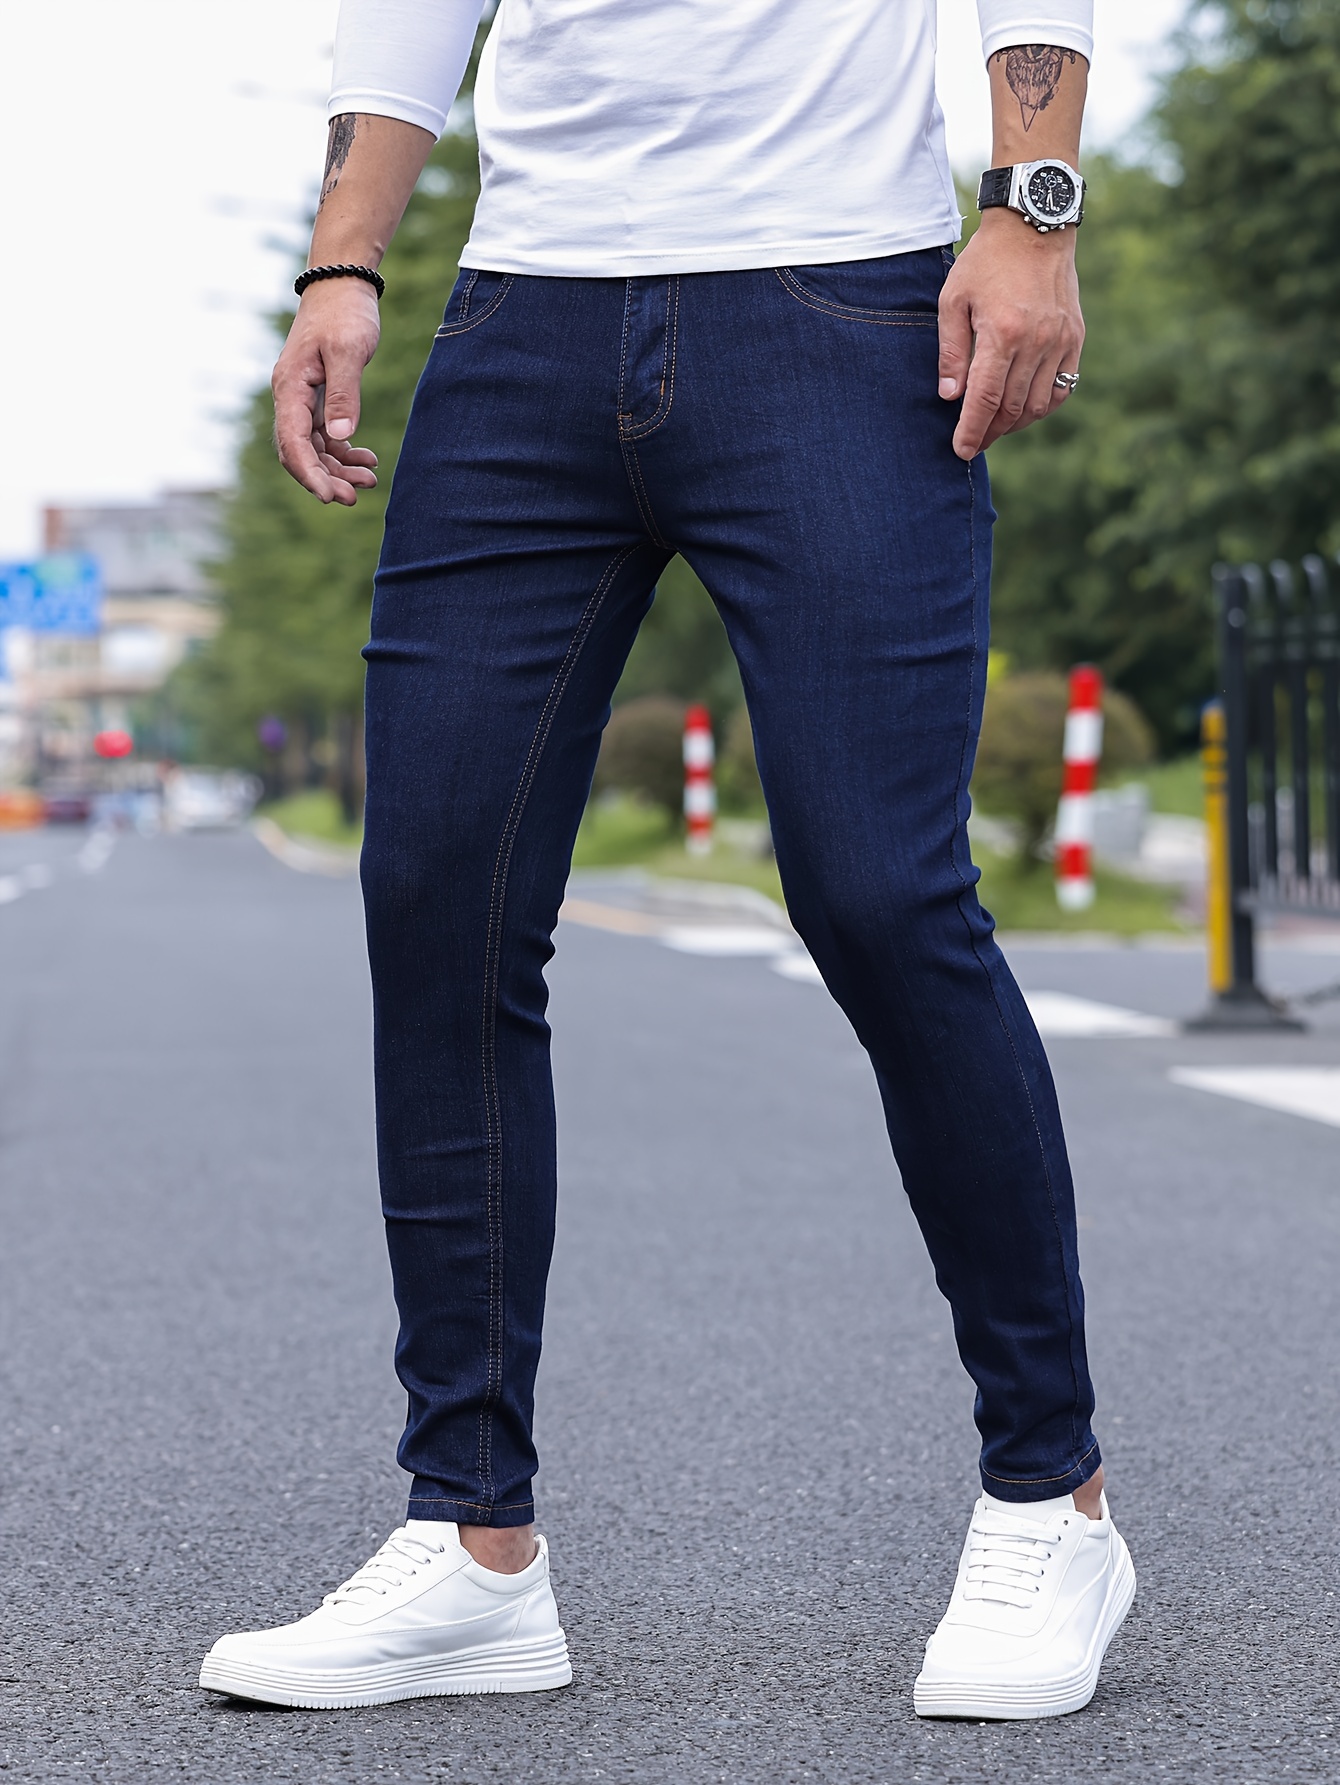 Washed Solid Woven Jeans, Men's Contrast Stitching Slim Fit Jeans Casual Street Style Stretch Denim Spring Summer Pants, Trousers,Casual,Temu